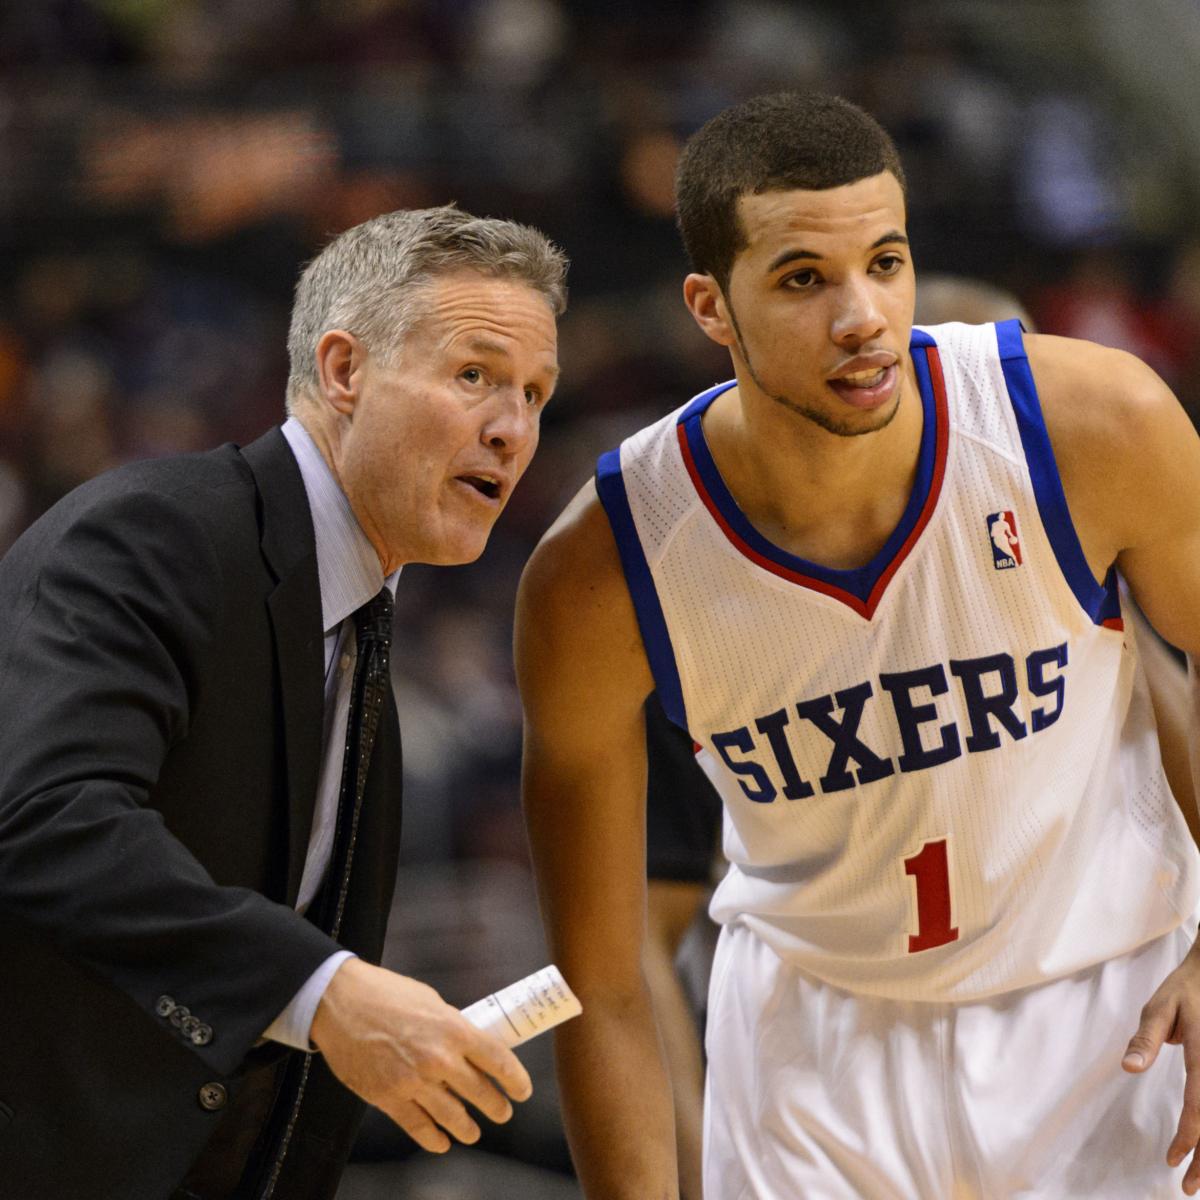 Sixers Brown: Noel has lost some weight